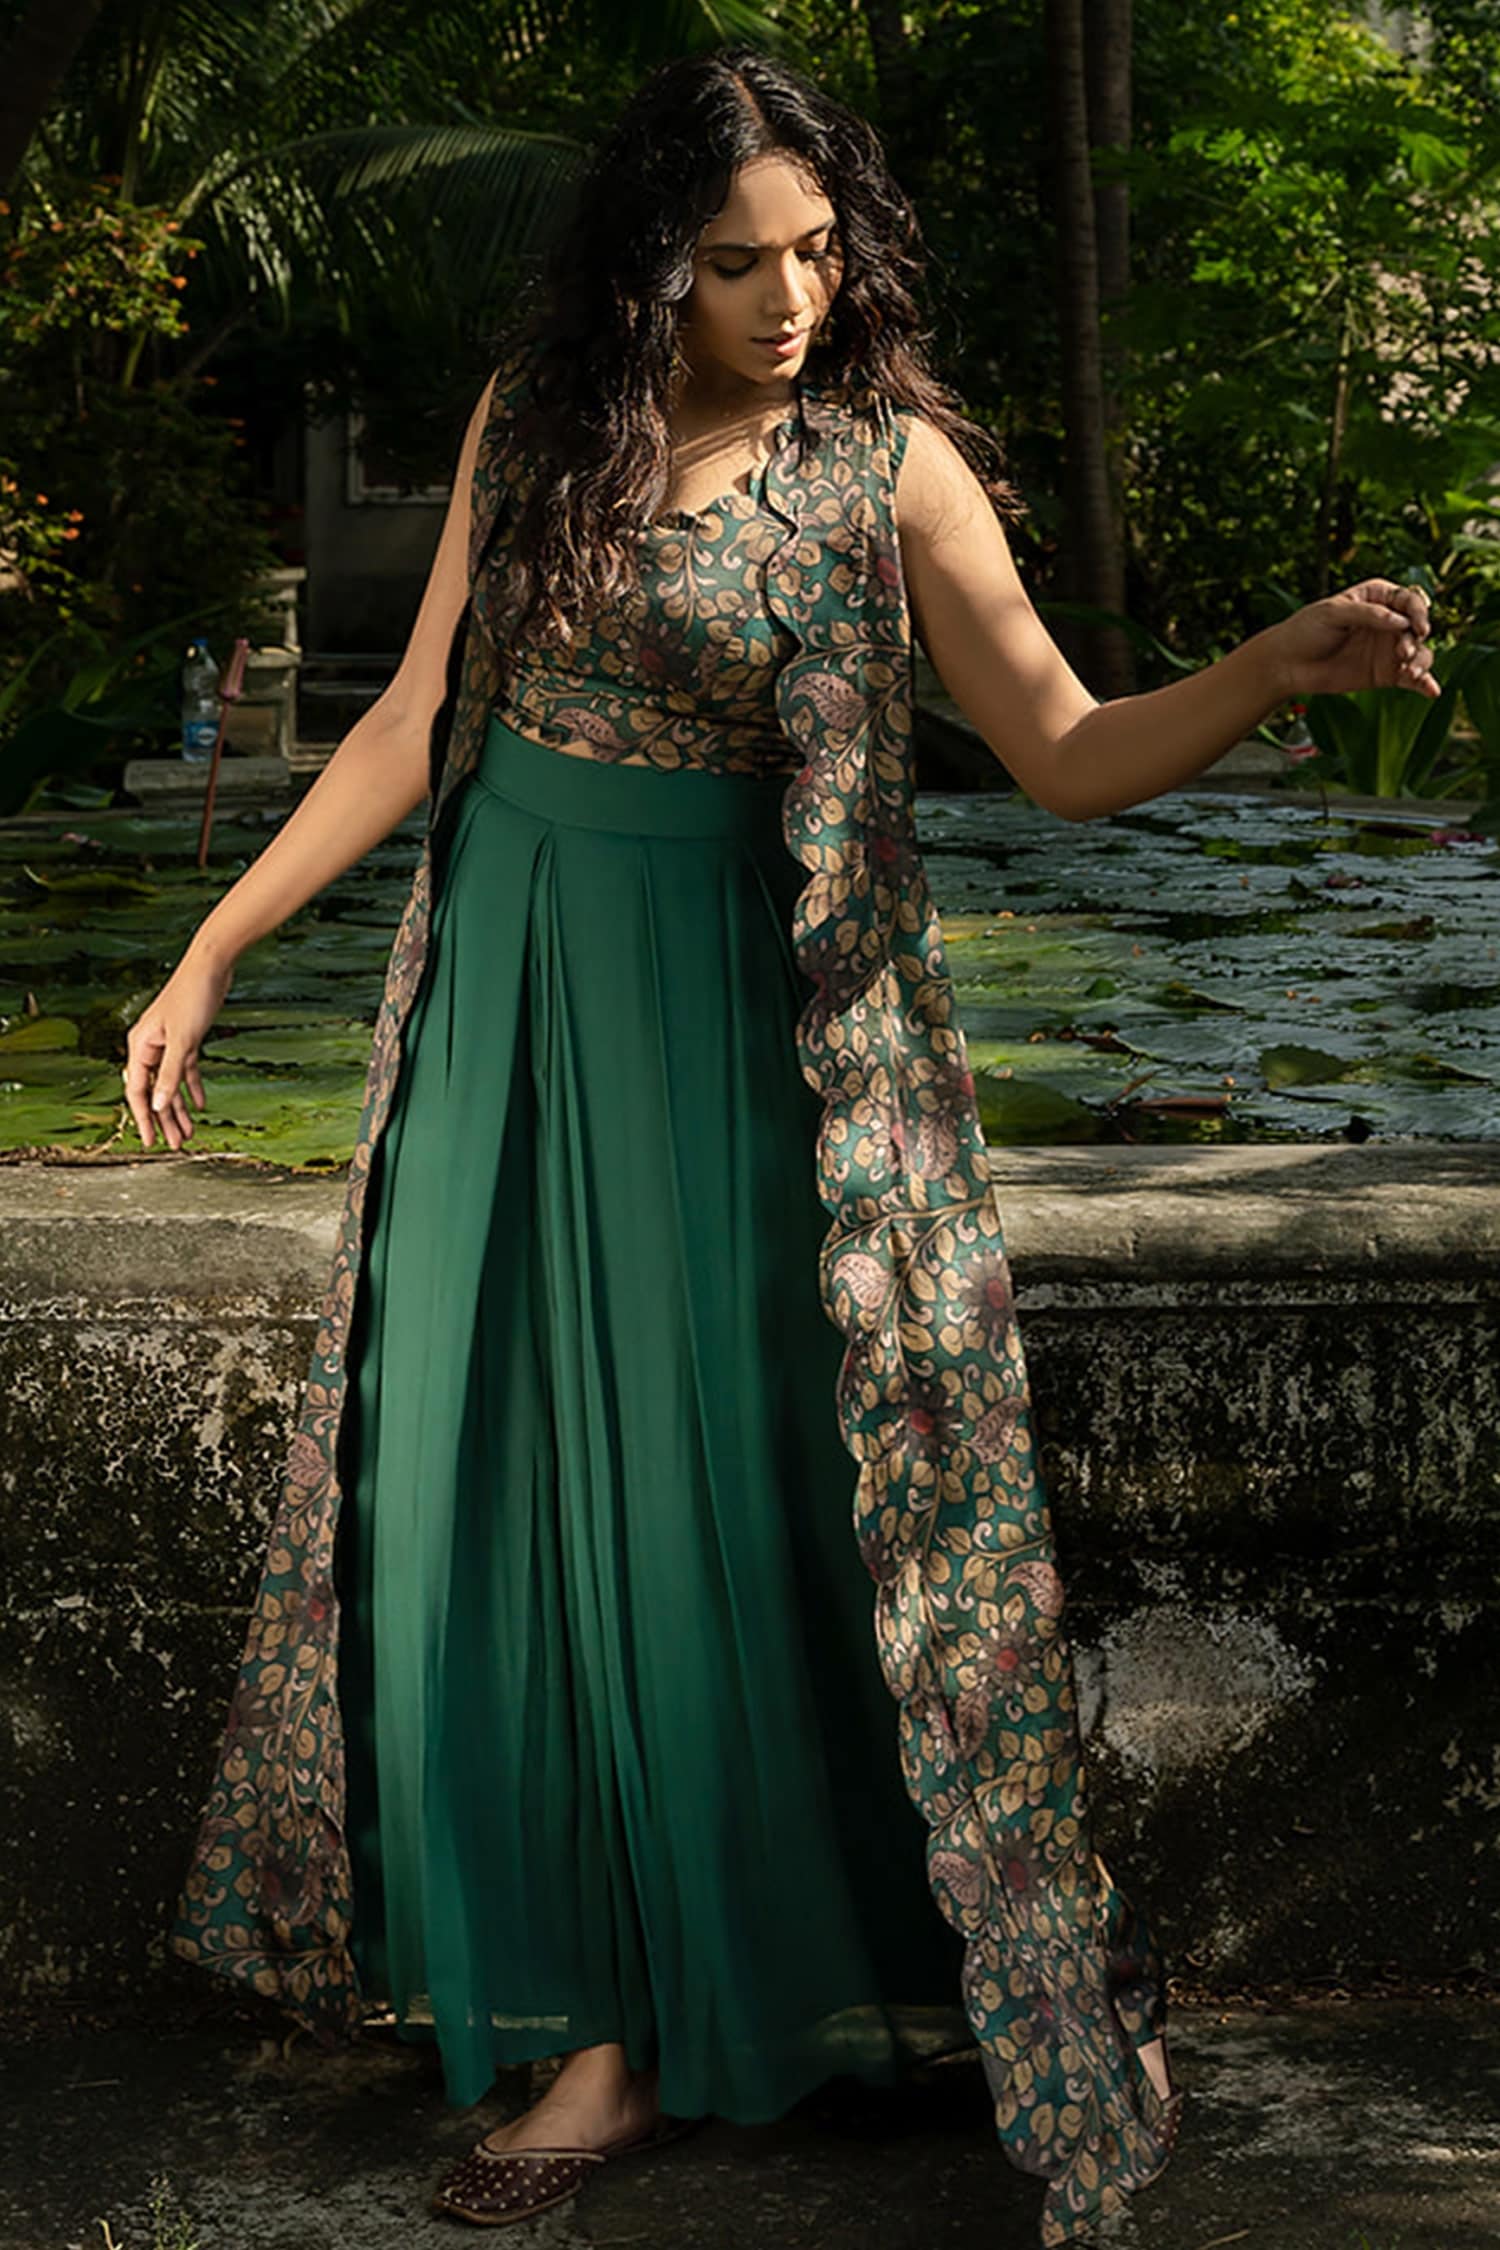 Amrin khan Green Modal Satin And Georgette Floral Long Jacket And Draped Skirt Set For Women